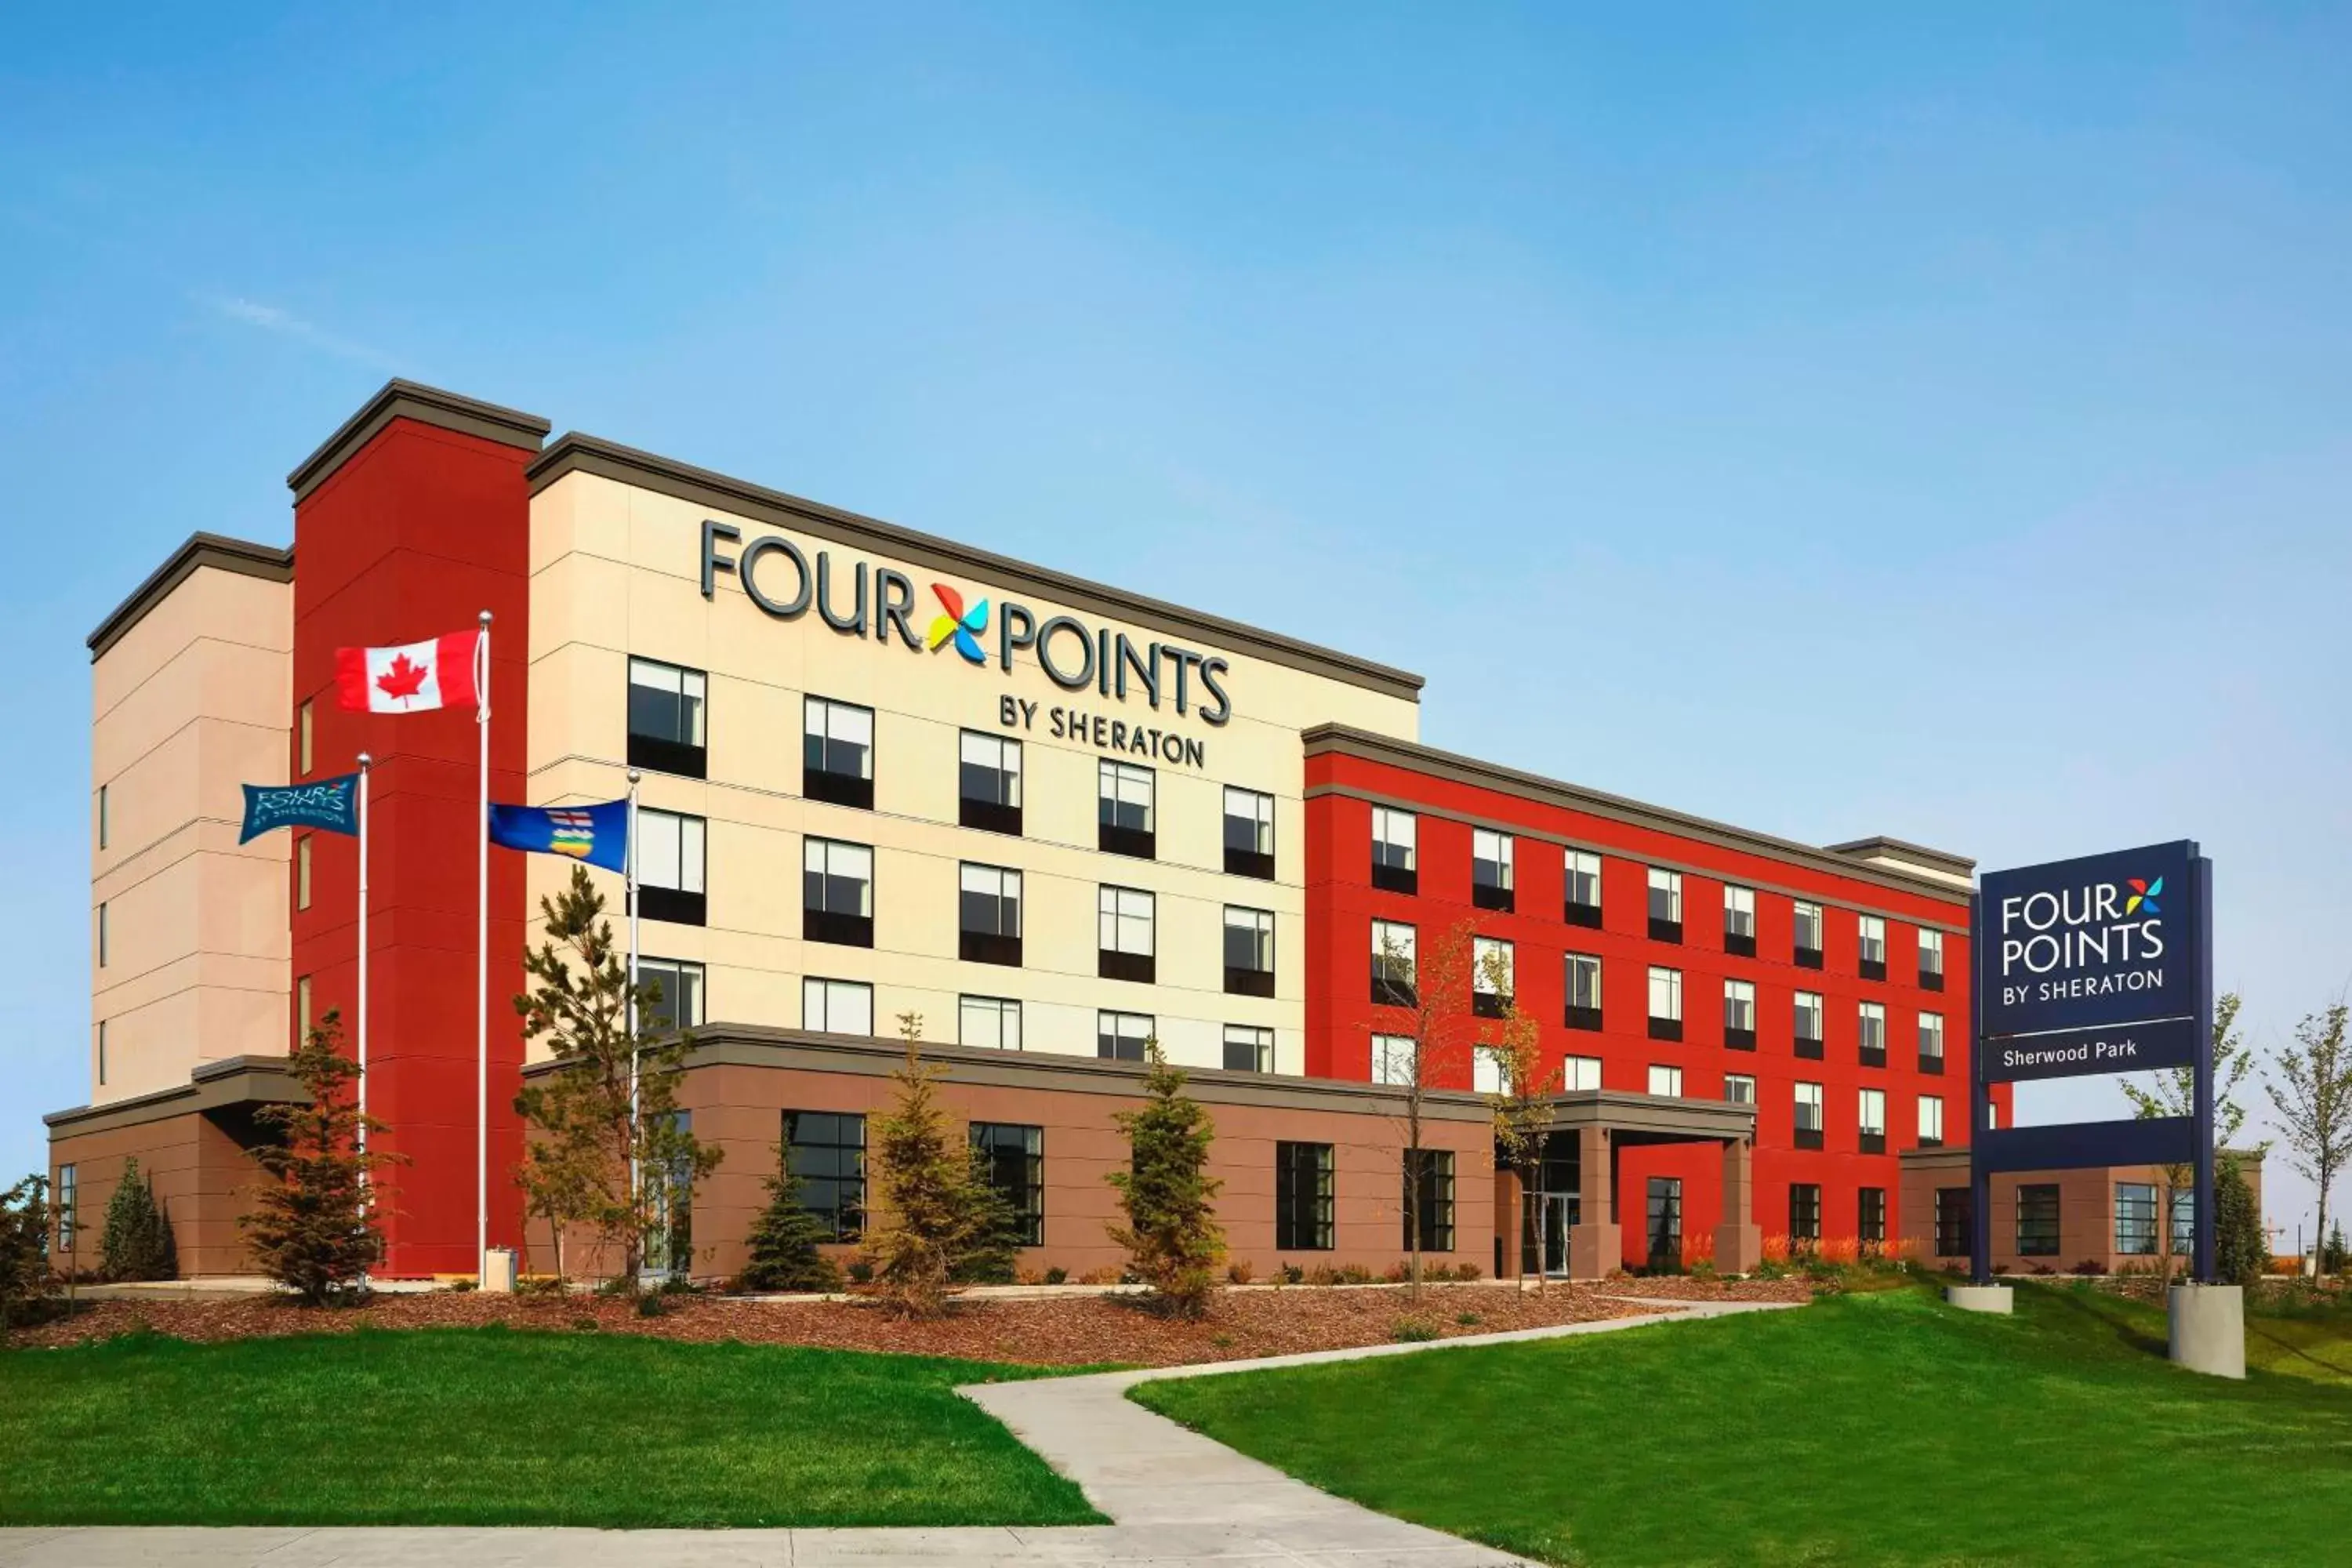 Property Building in Four Points by Sheraton Sherwood Park